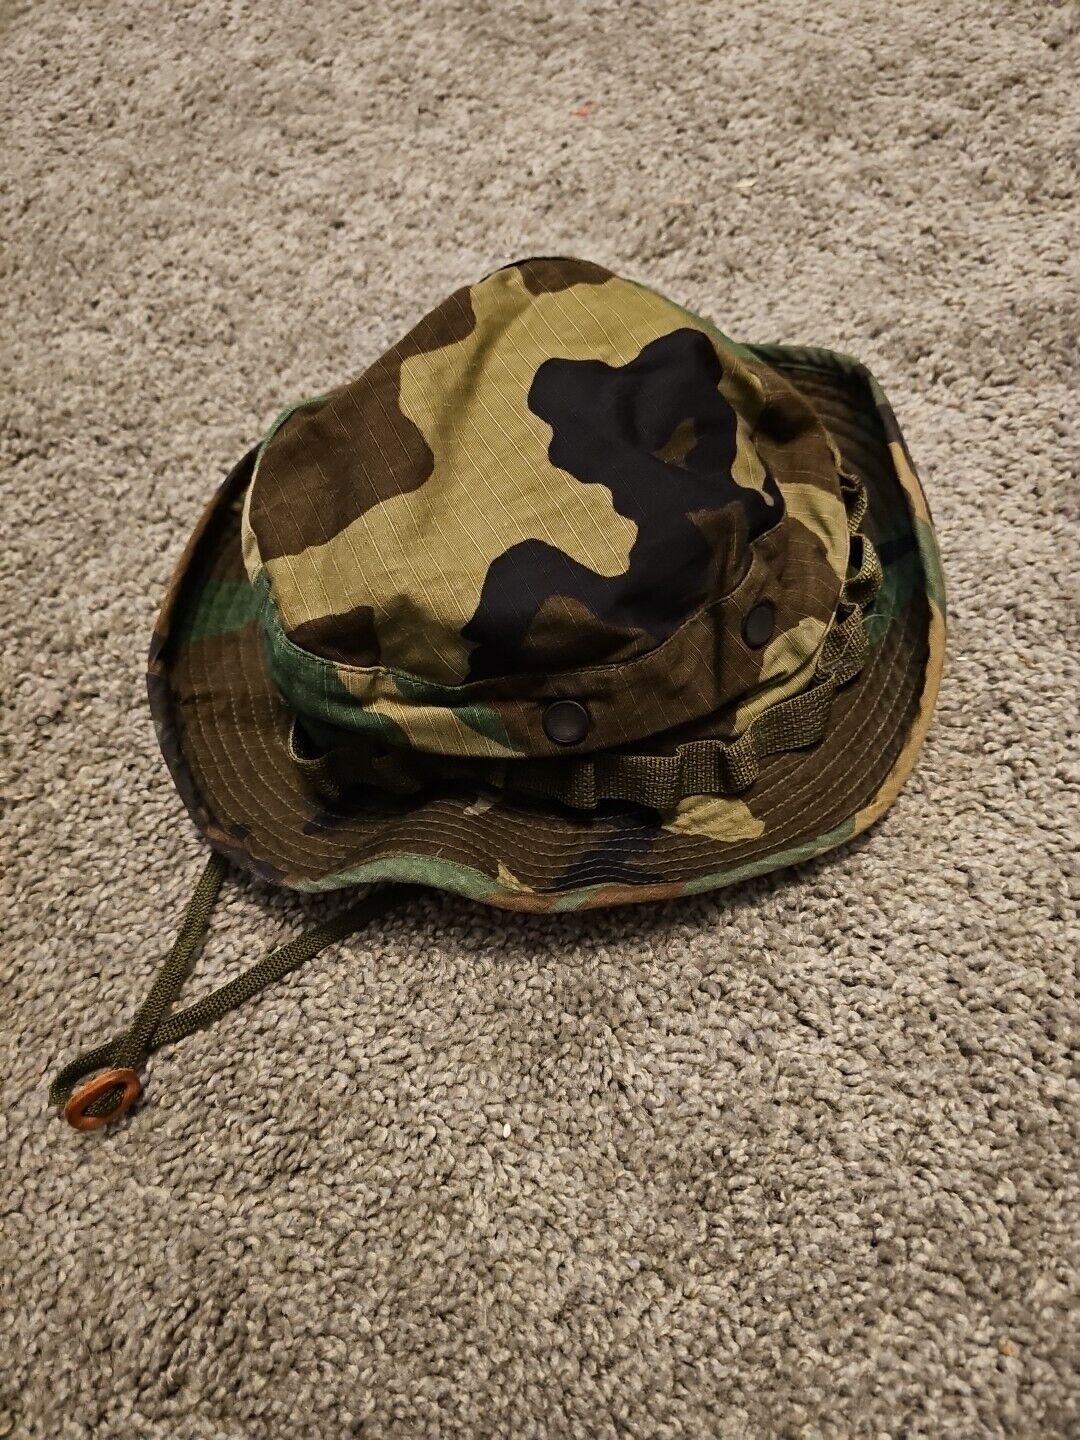 U.S MILITARY STYLE HOT WEATHER BOONIE HAT WOODLAND CAMO RIP-STOP Size 7 1/2 